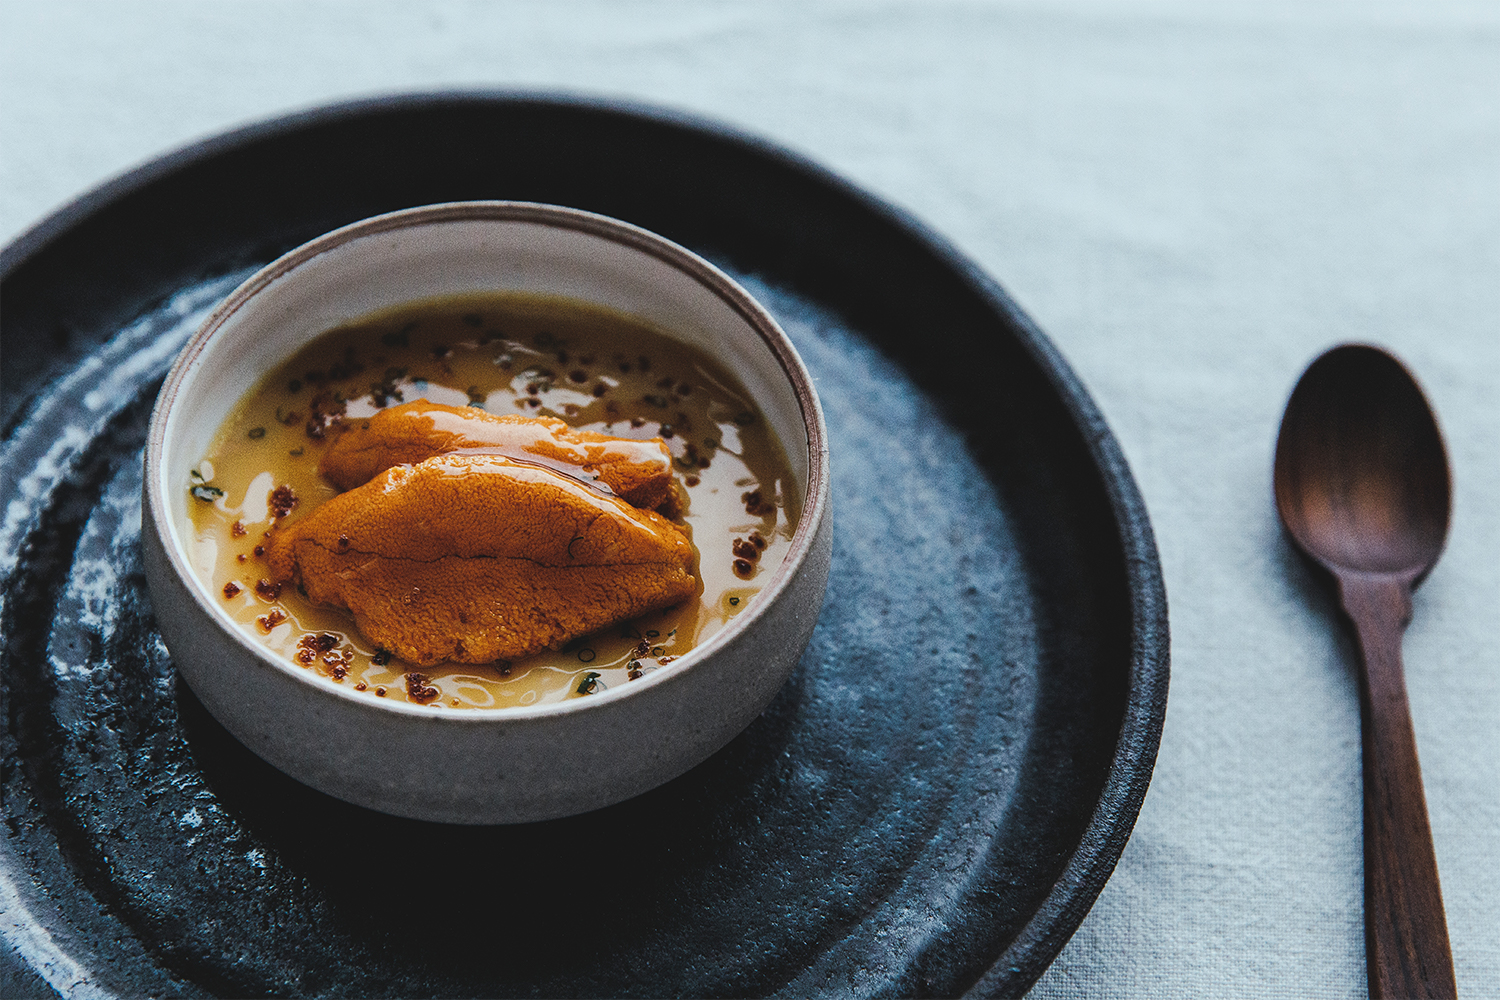 The purple sea urchin dish Uni Chawanmushi plated with a spoon next to it on a table at at Harbor House Inn in Mendocino